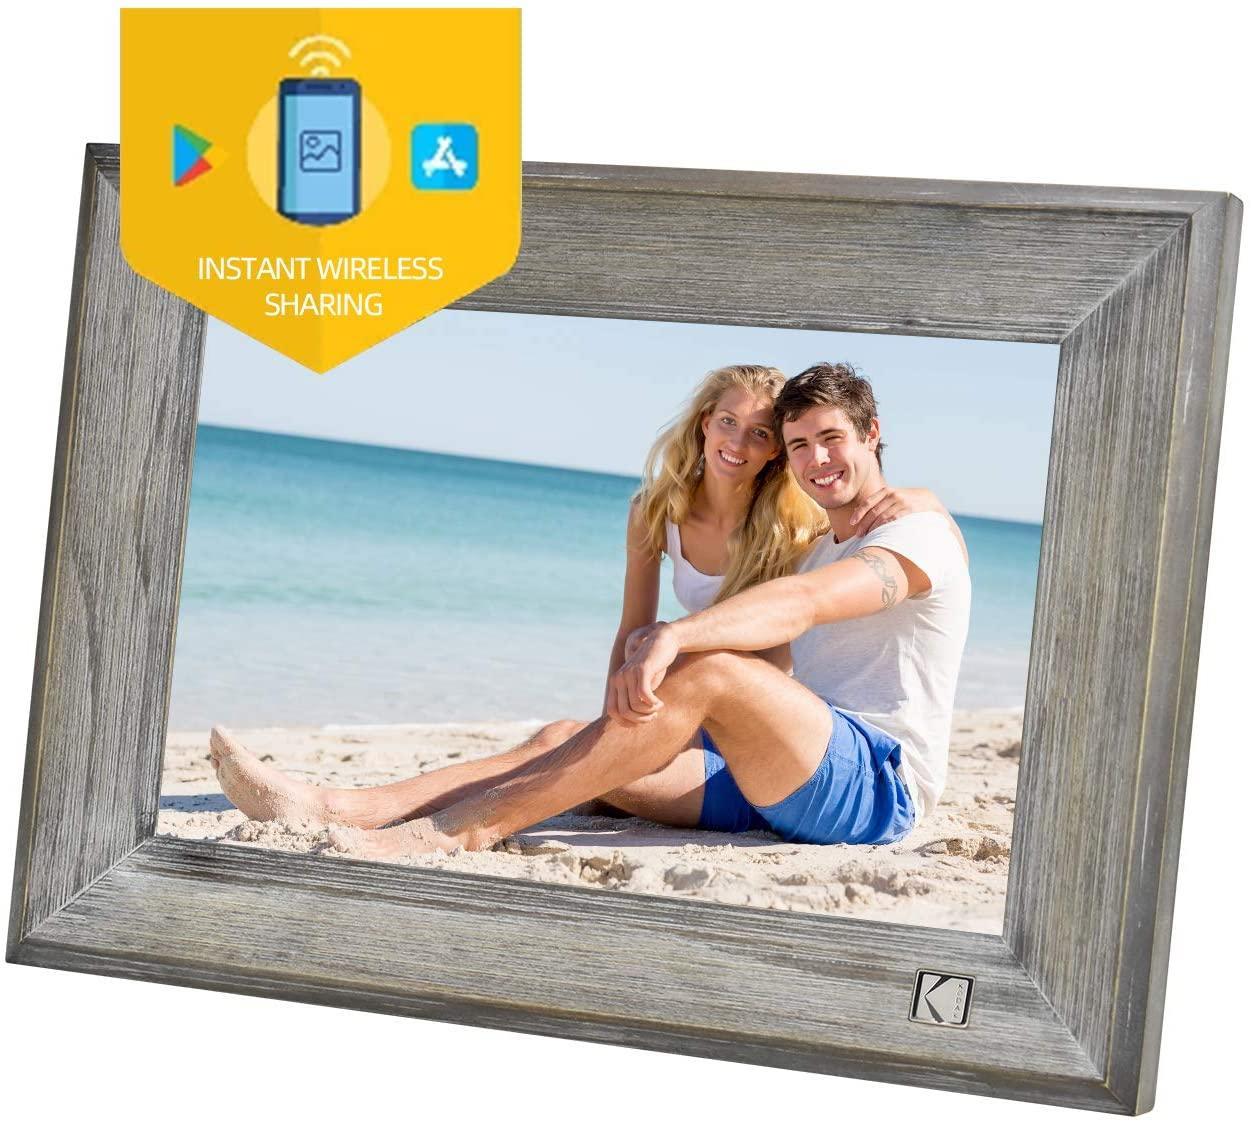 KODAK Classic Digital Photo Frame Wood 1013W, 10 inch Touch Screen Electronic Picture Frame Wifi Enabled, Cloud Storage, 16GB Internal Memory with Picture Music Video Function